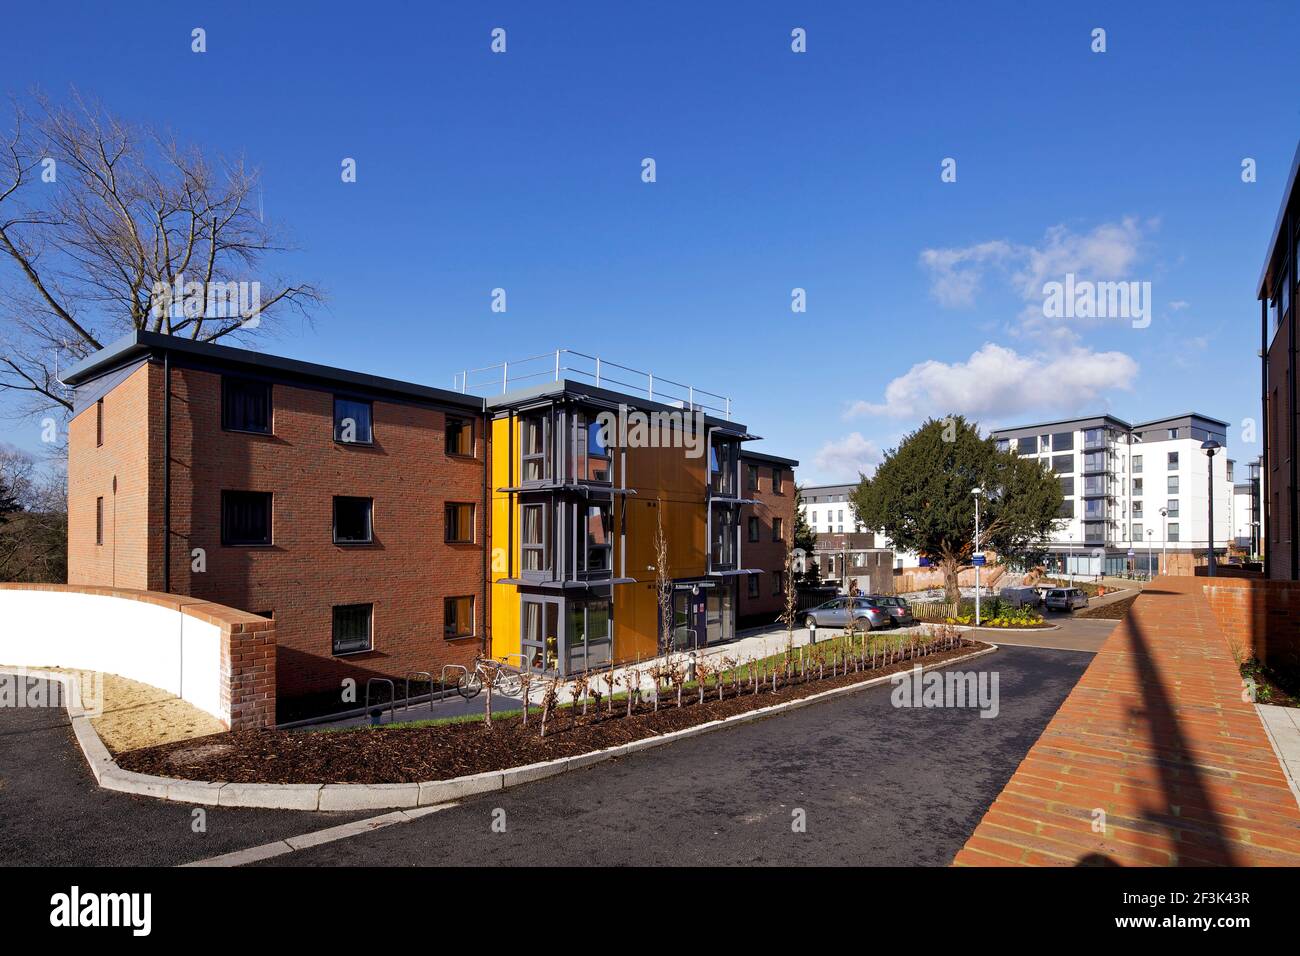 Birks Hall, University of Exeter, Exeter. Willmore Iles Architects have completed a large development of student accommodation at the University of Ex Stock Photo